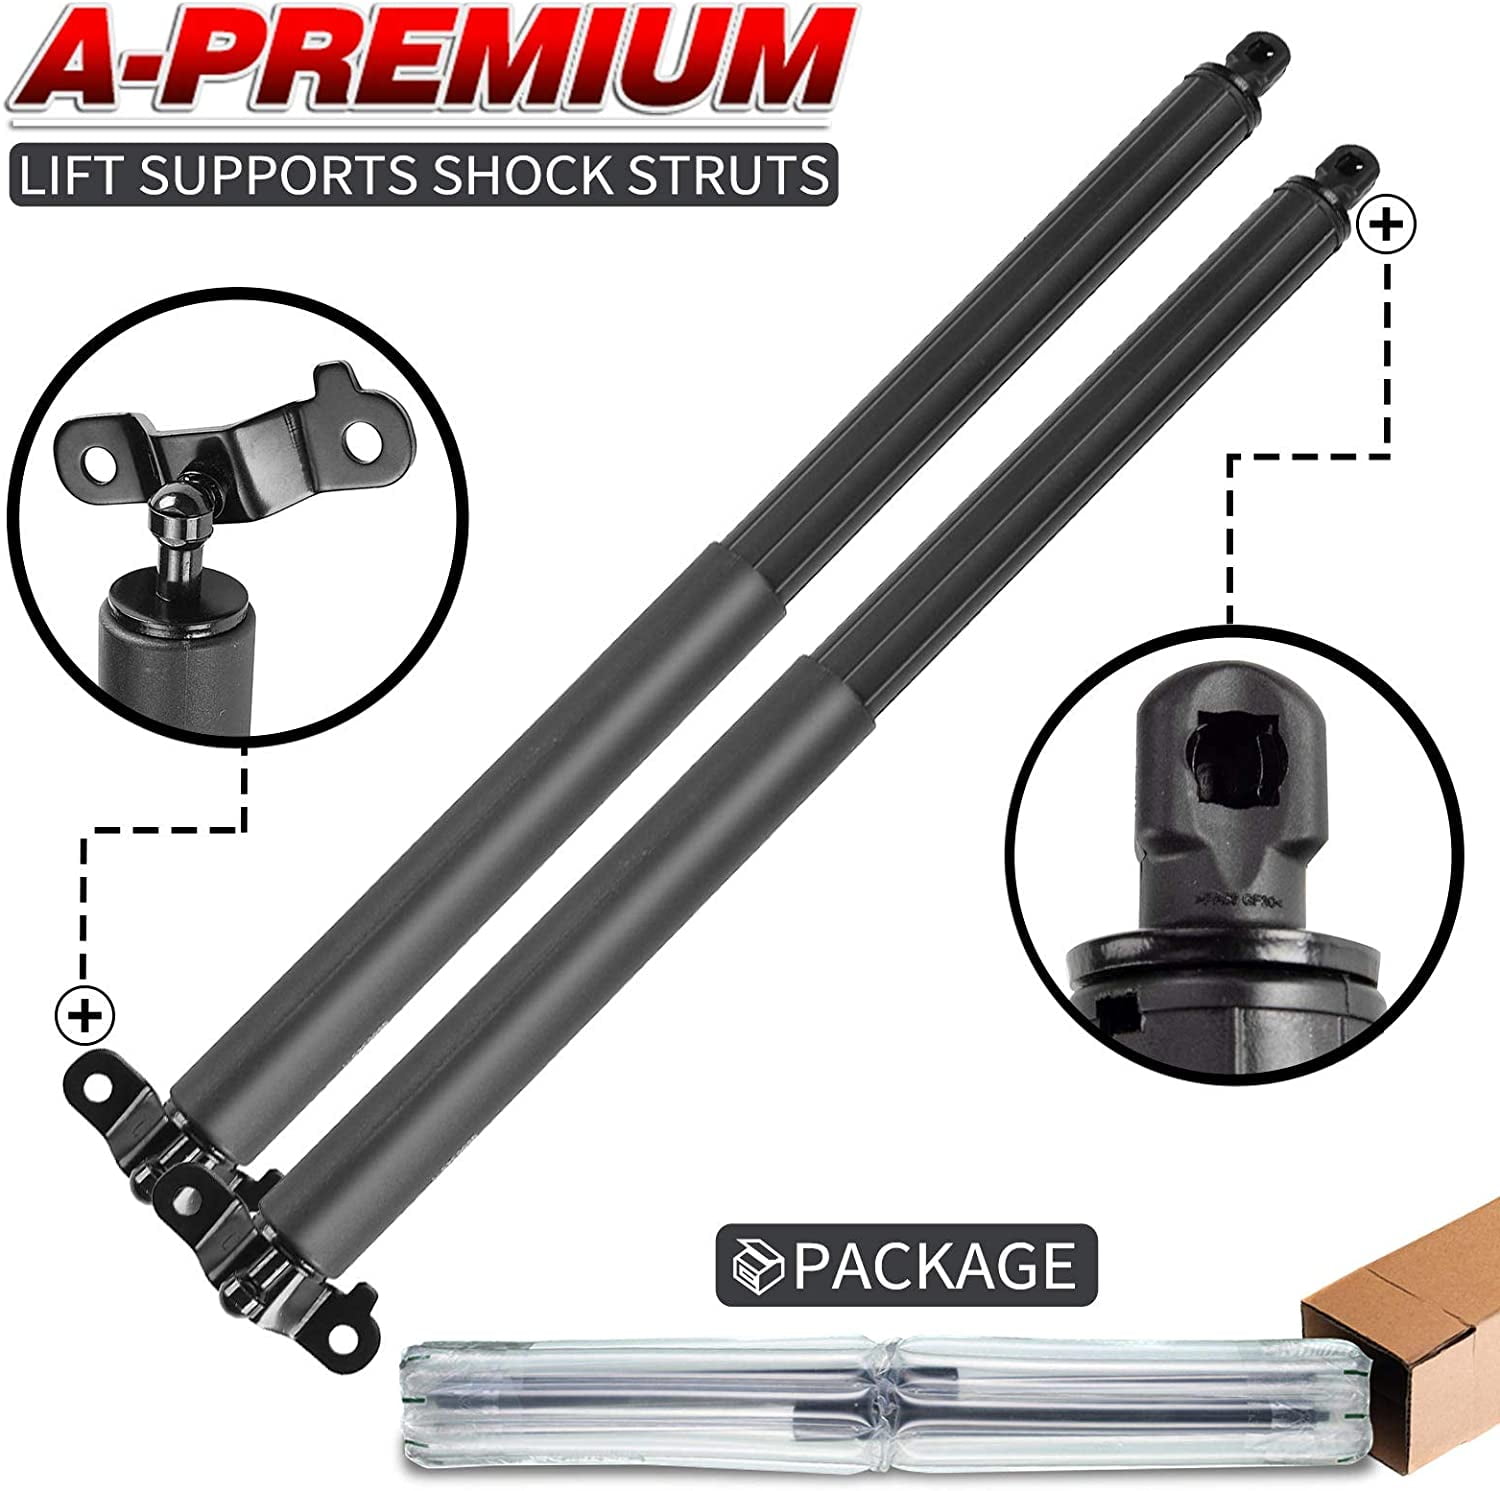 A-Premium Rear Right Lift Support Shock Strut Compatible with Mercedes-Benz W164 ML320 2007-2009 ML350 ML450 ML500 ML550 ML63 AMG With Manual Opening 